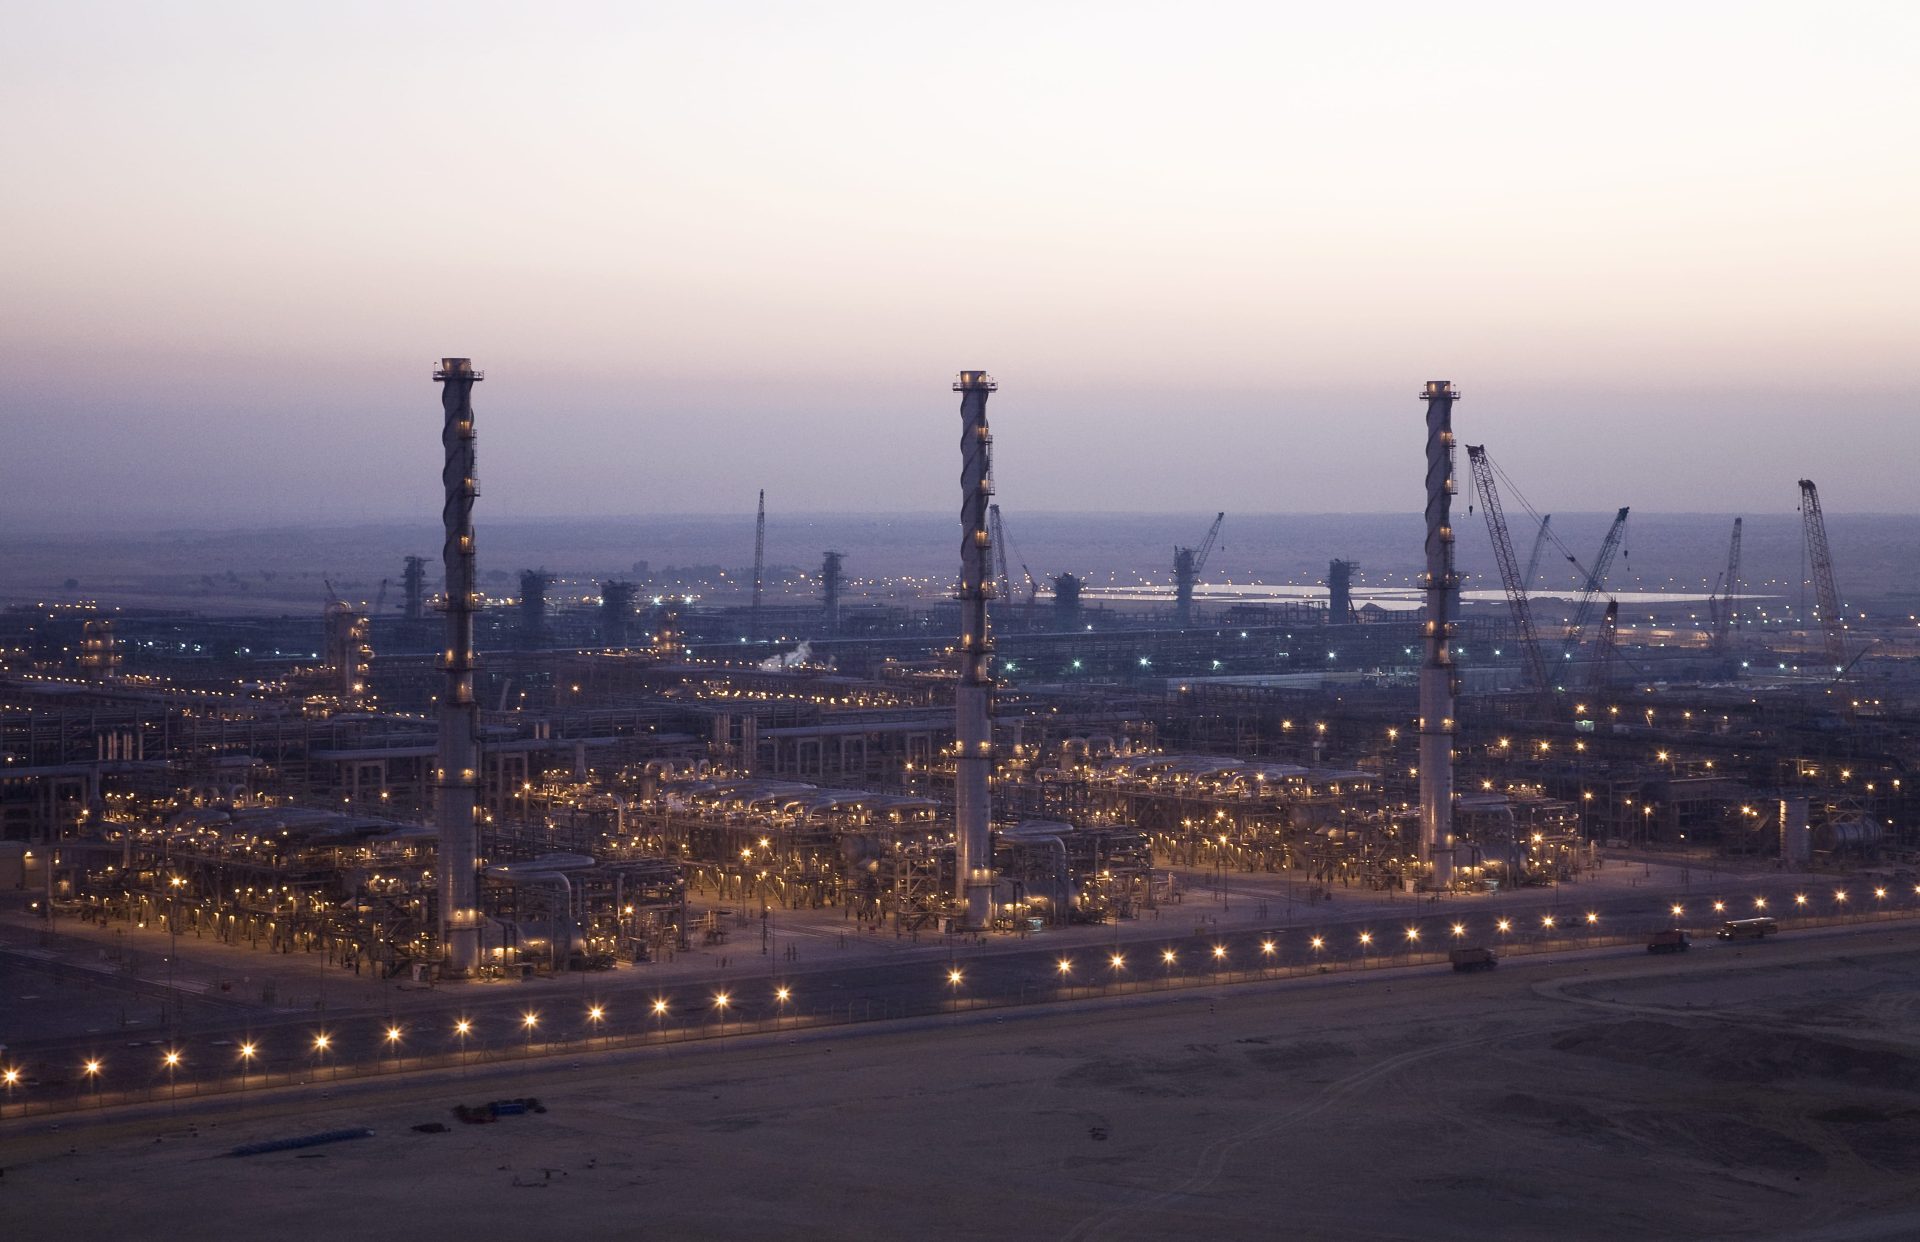 Overview at dawn of the Sulfur Recovery Plant at the Khursaniyah Gas Plant.